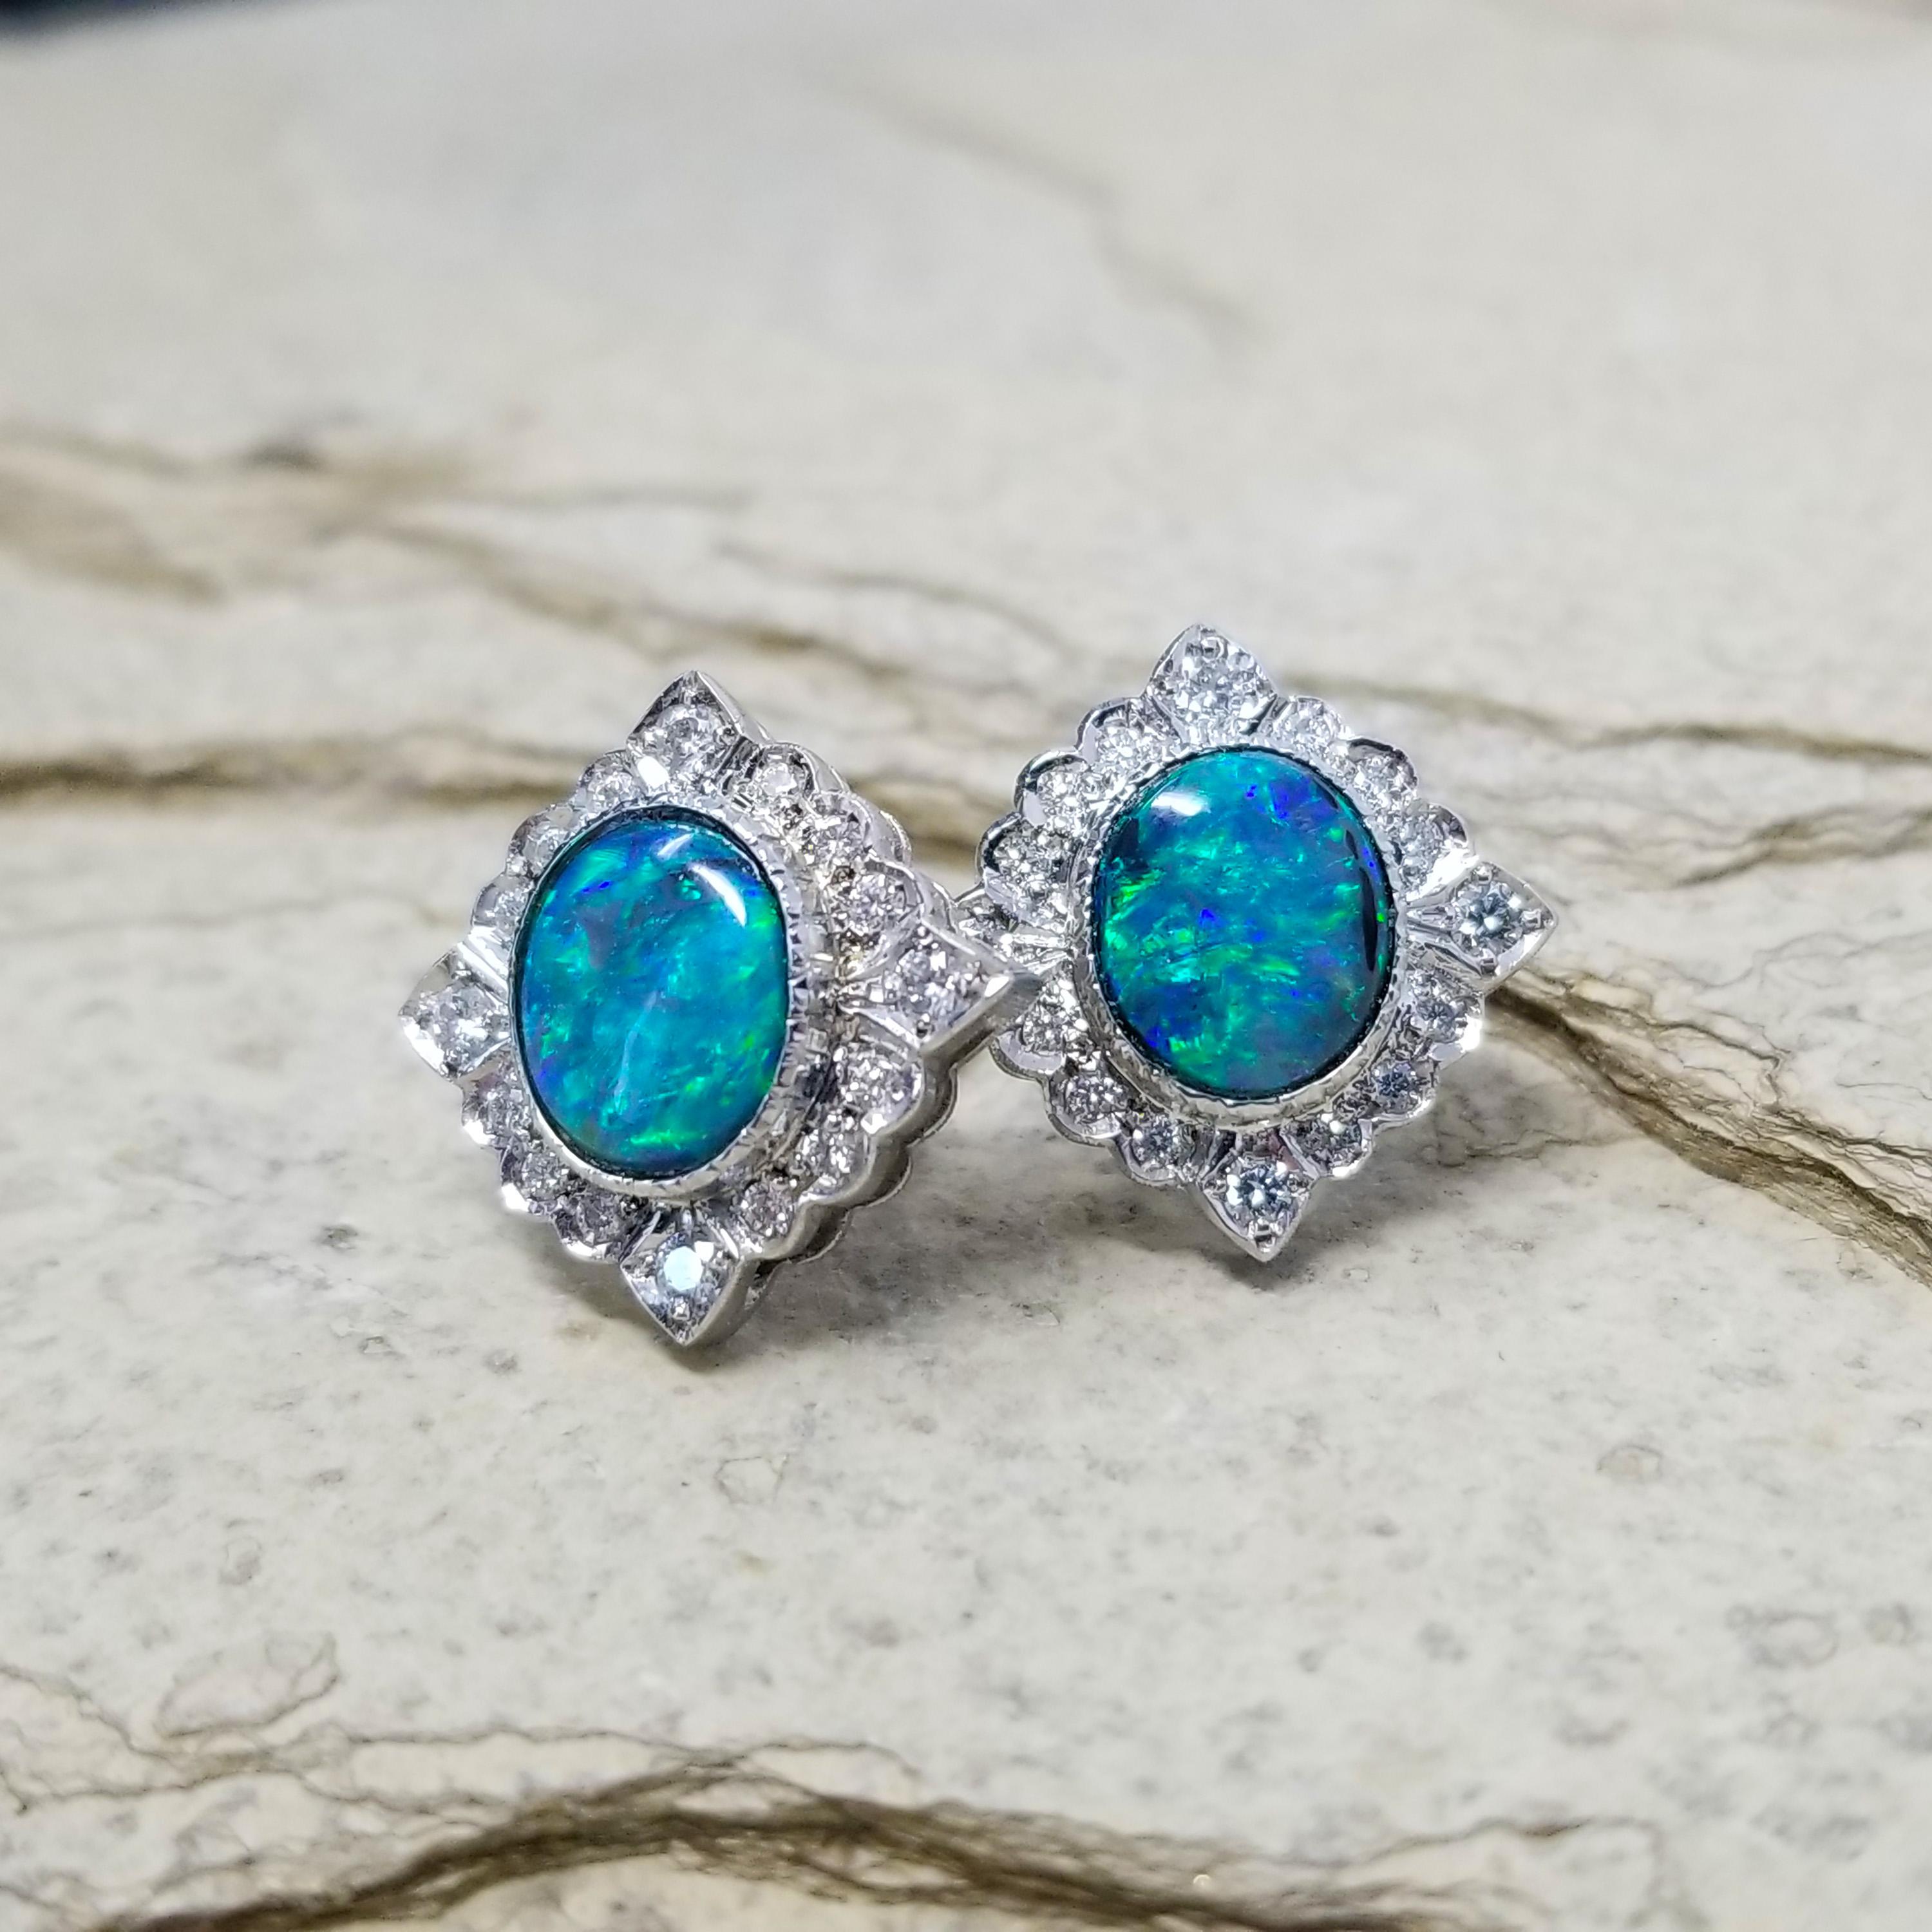 Contemporary 3.64ct Australian Black Opal, Diamond, and 18kt Alessia Earrings, Made in Italy